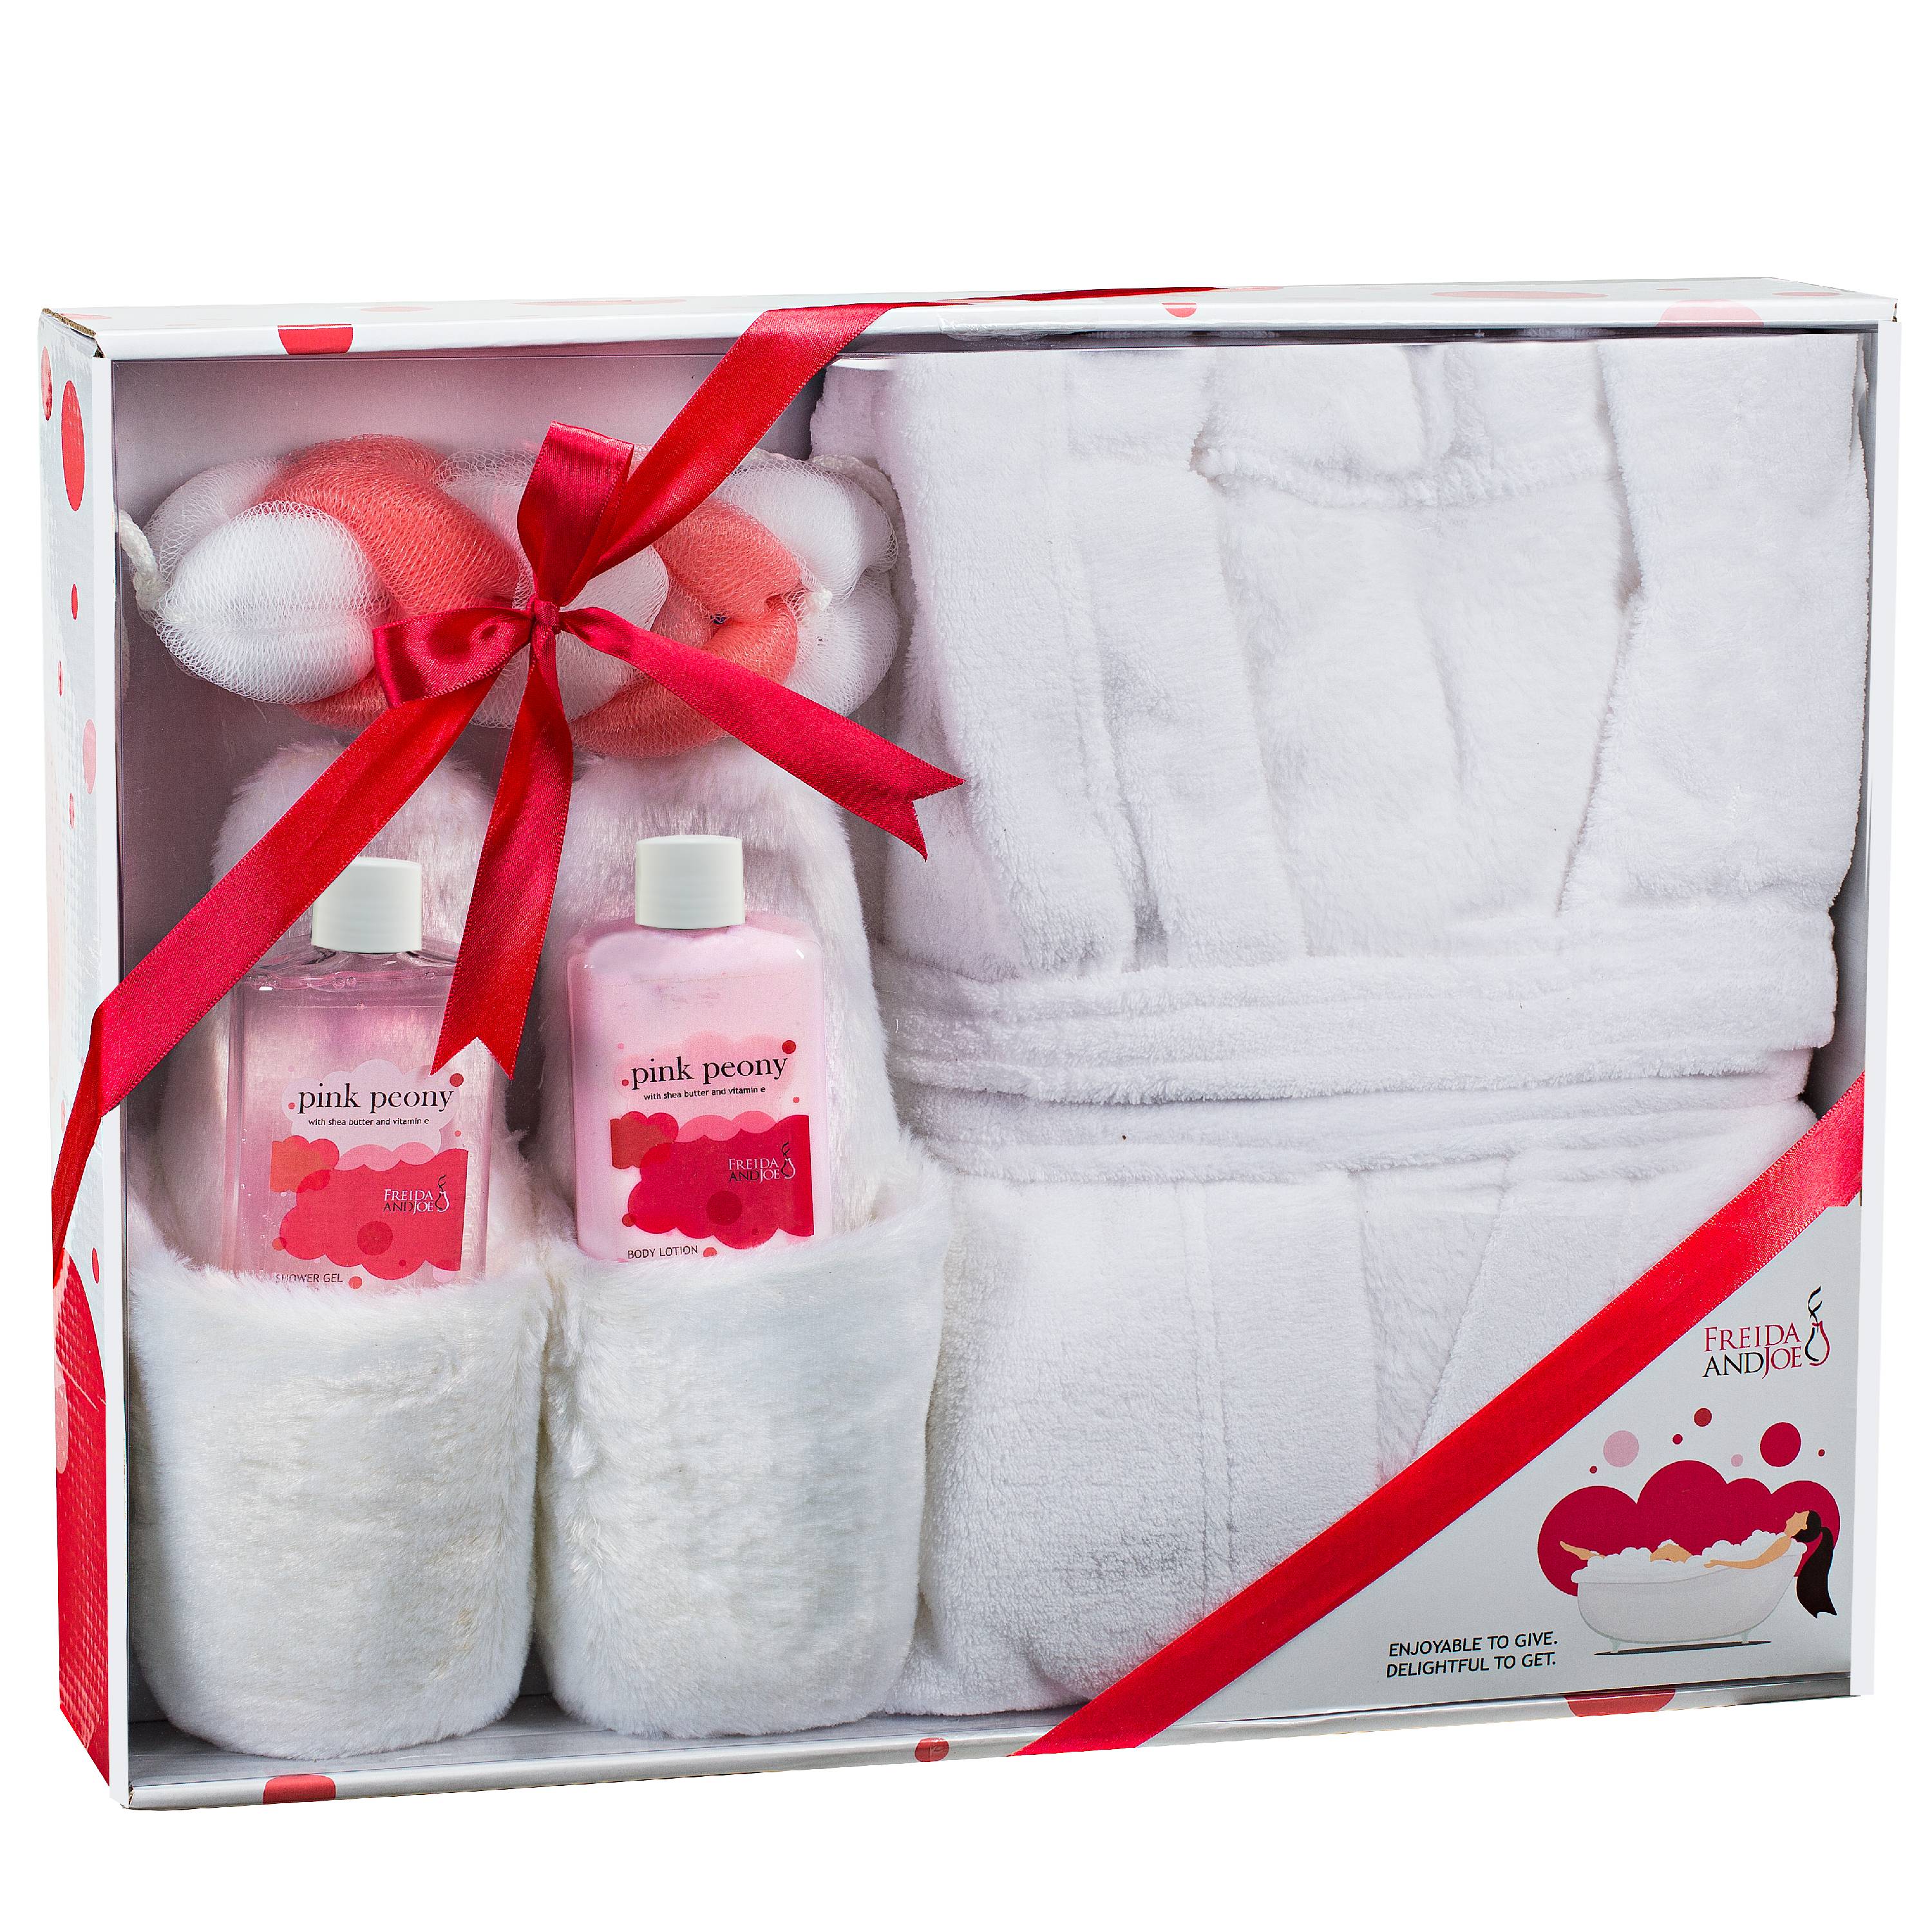 Freida & Joe Gift for Her Pink Peony Scent Home Spa Gift Basket with Luxury Bathrobe & Slipper for Women - image 1 of 5